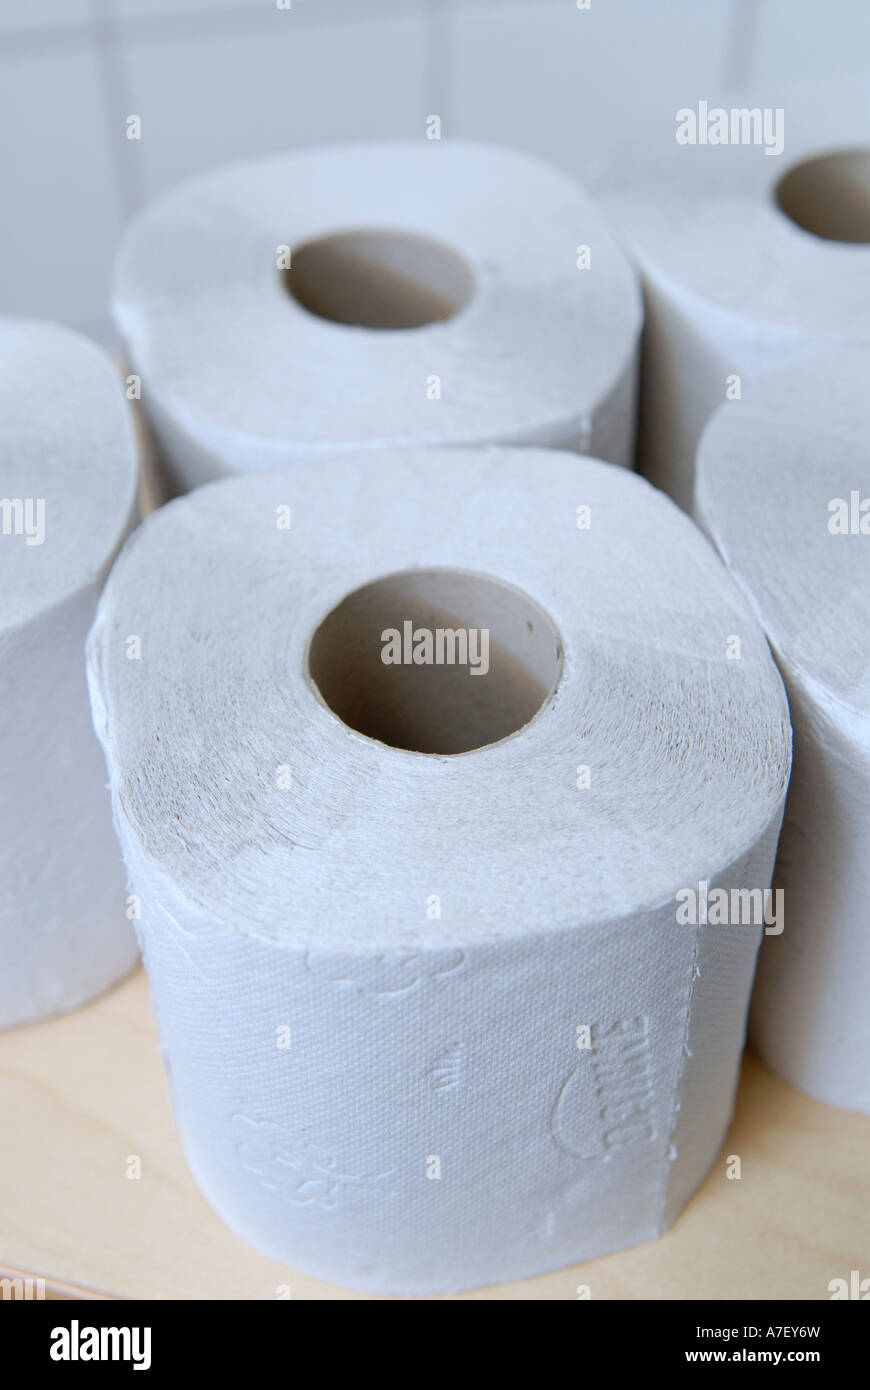 Toilet paper from recycled paper Stock Photo